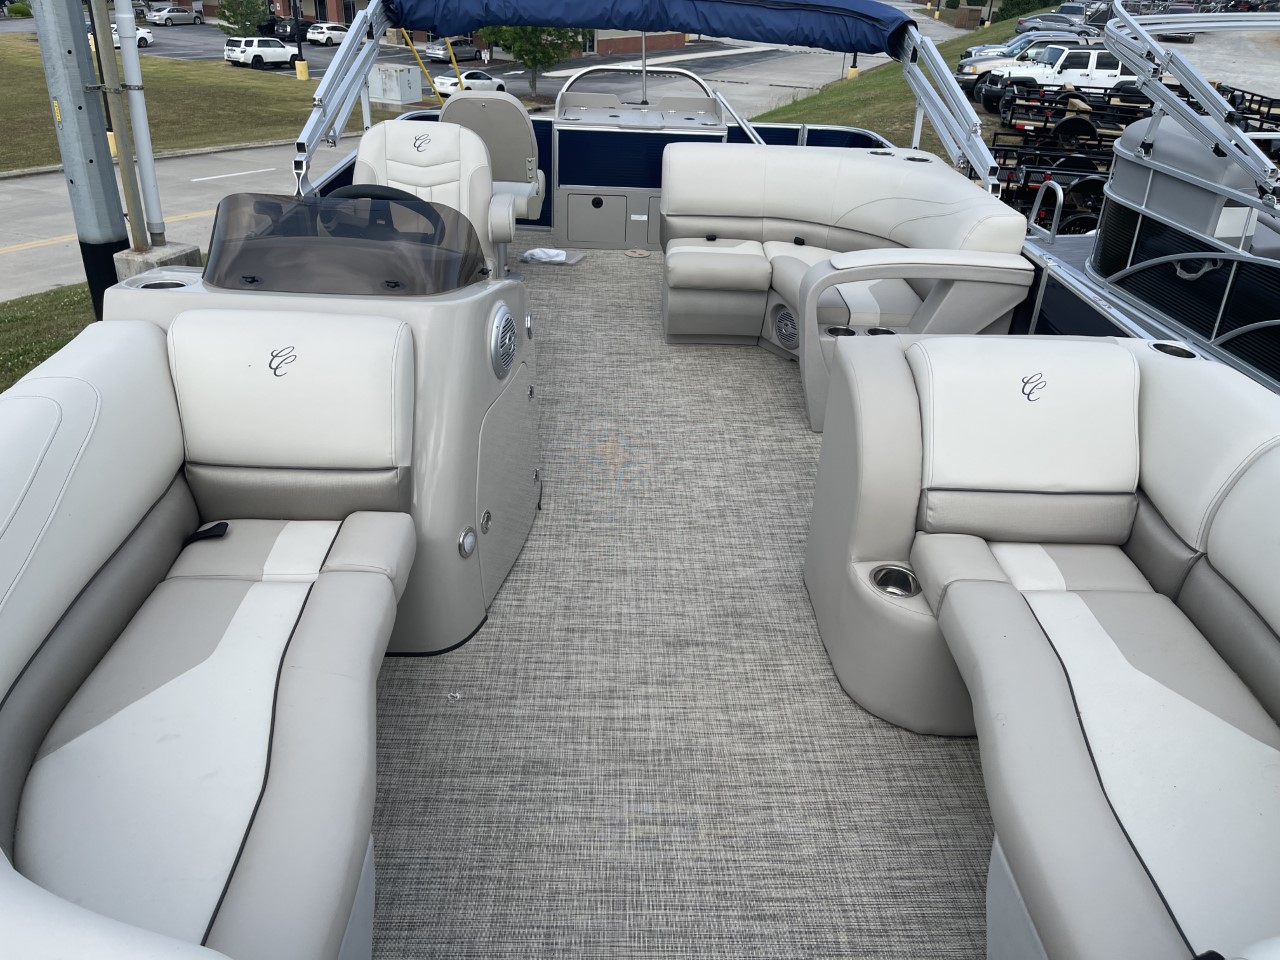 2022 CYPRESS CAY SEABREEZE 212 Pontoon Boat for sale in College Dale, TN - image 3 